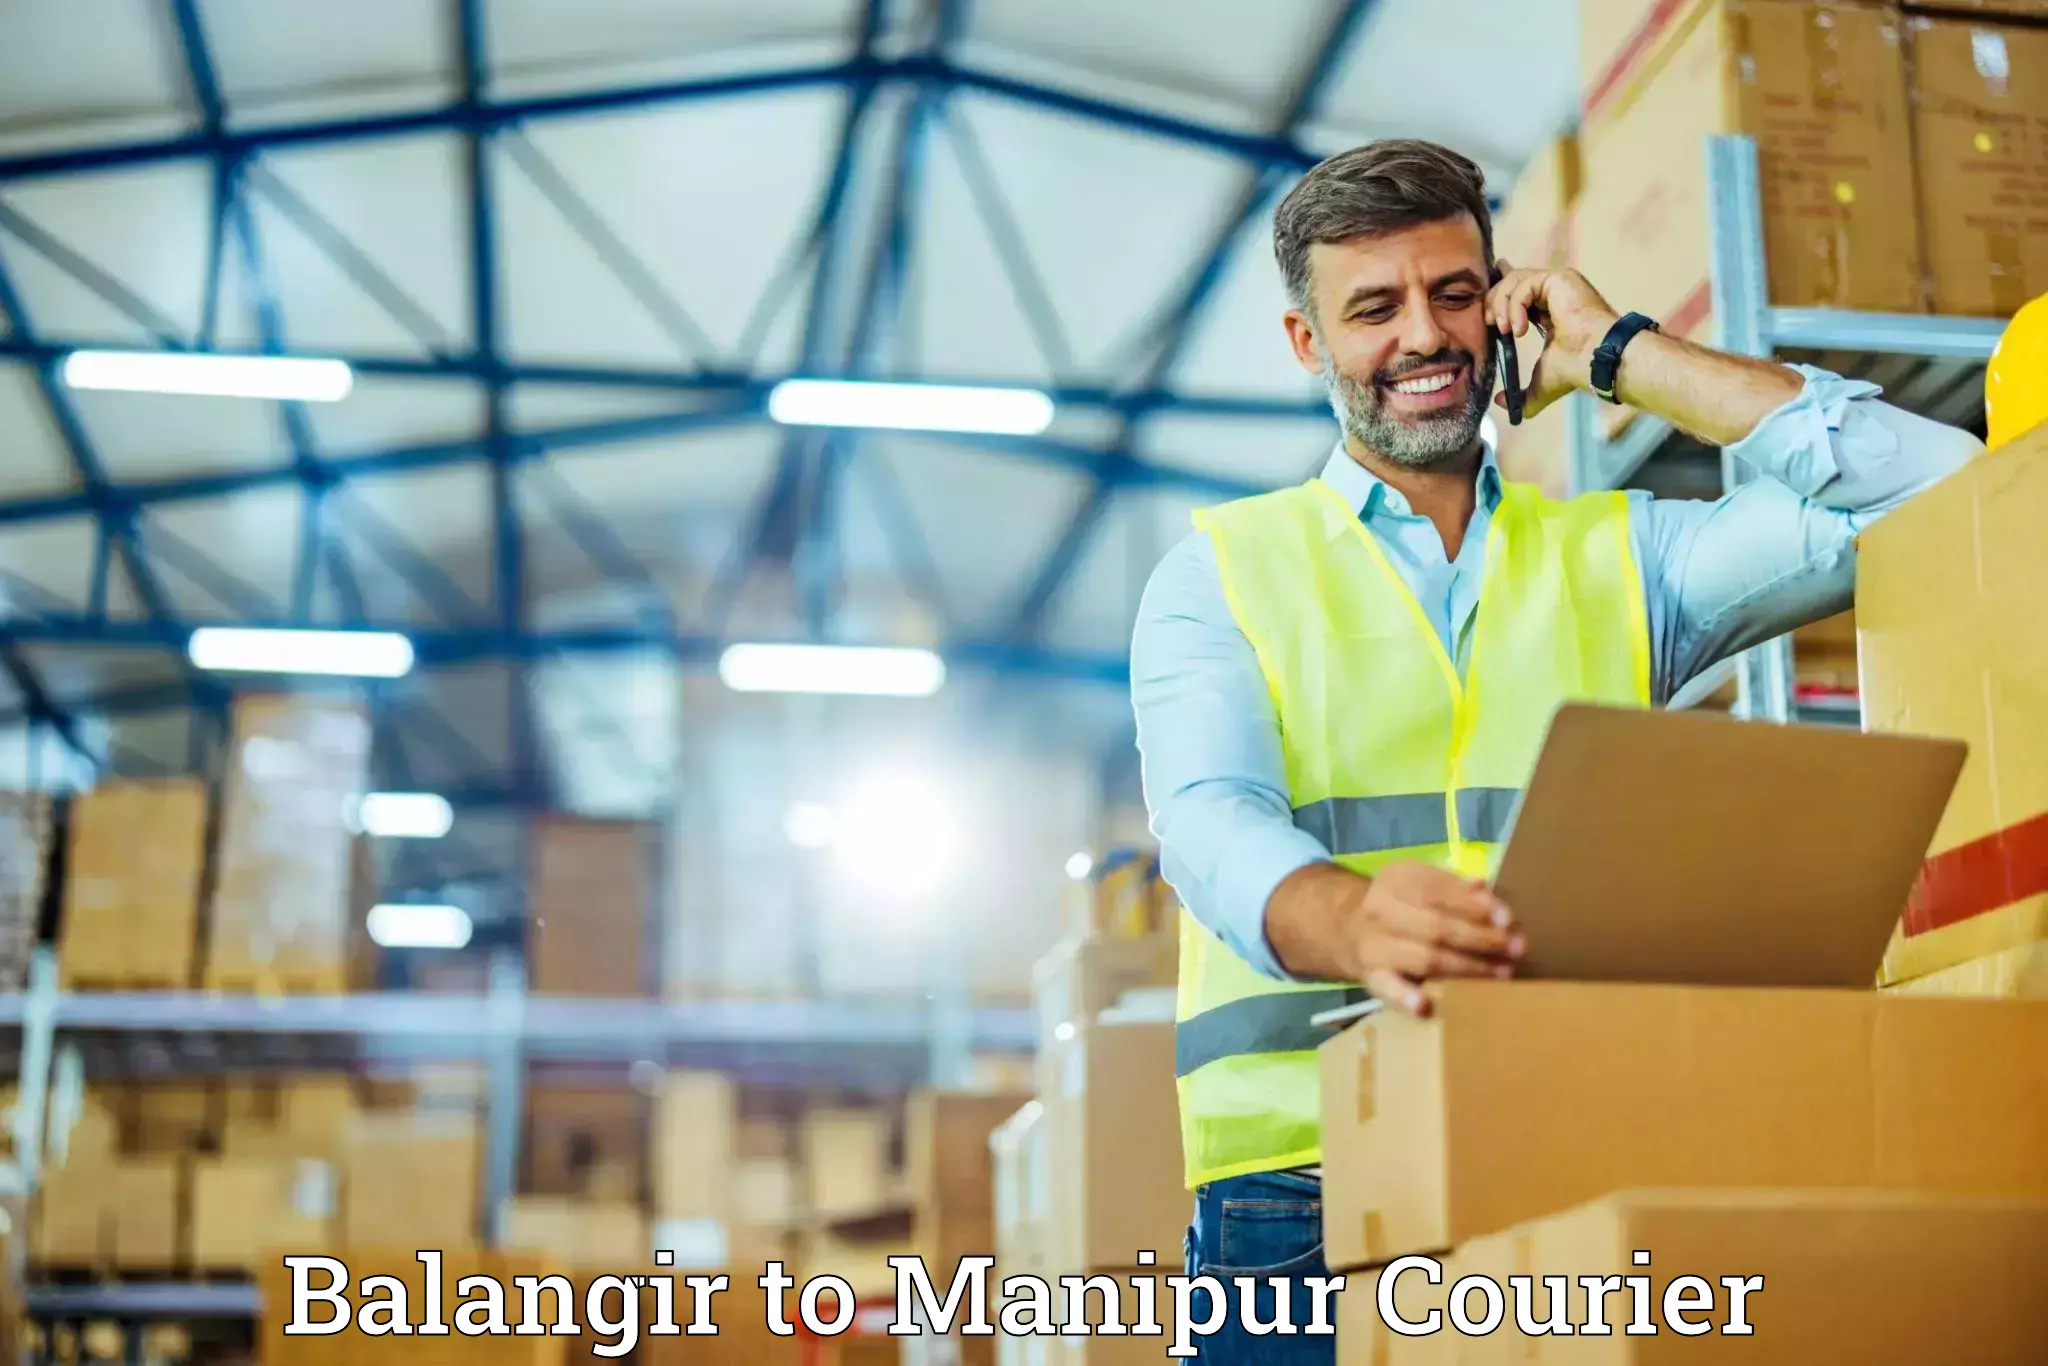 Furniture delivery service Balangir to Kanti